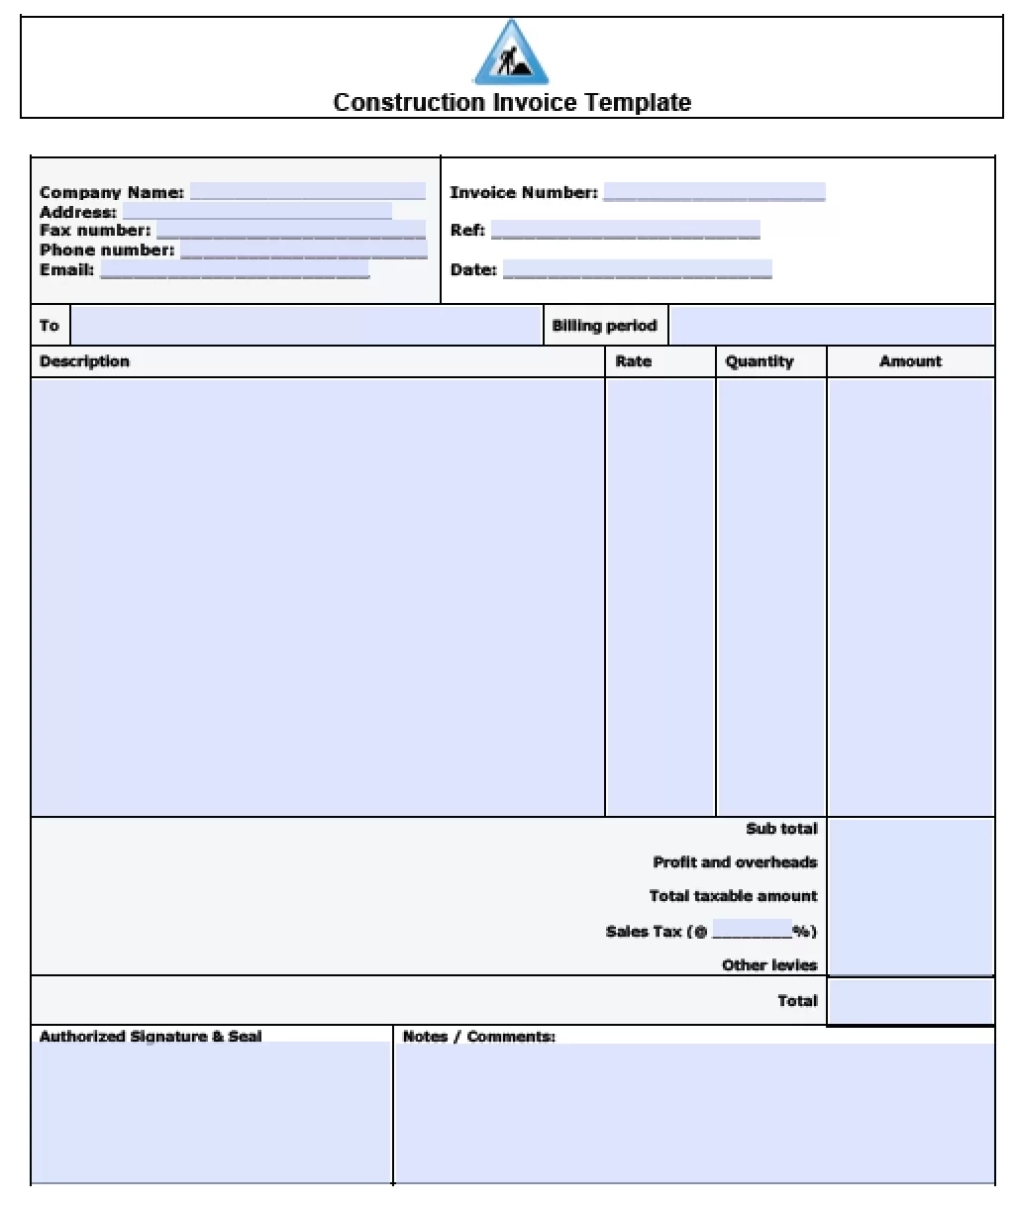 Construction Invoice Template Excel - Ovjuklhtd In Roofing Invoice Template Free